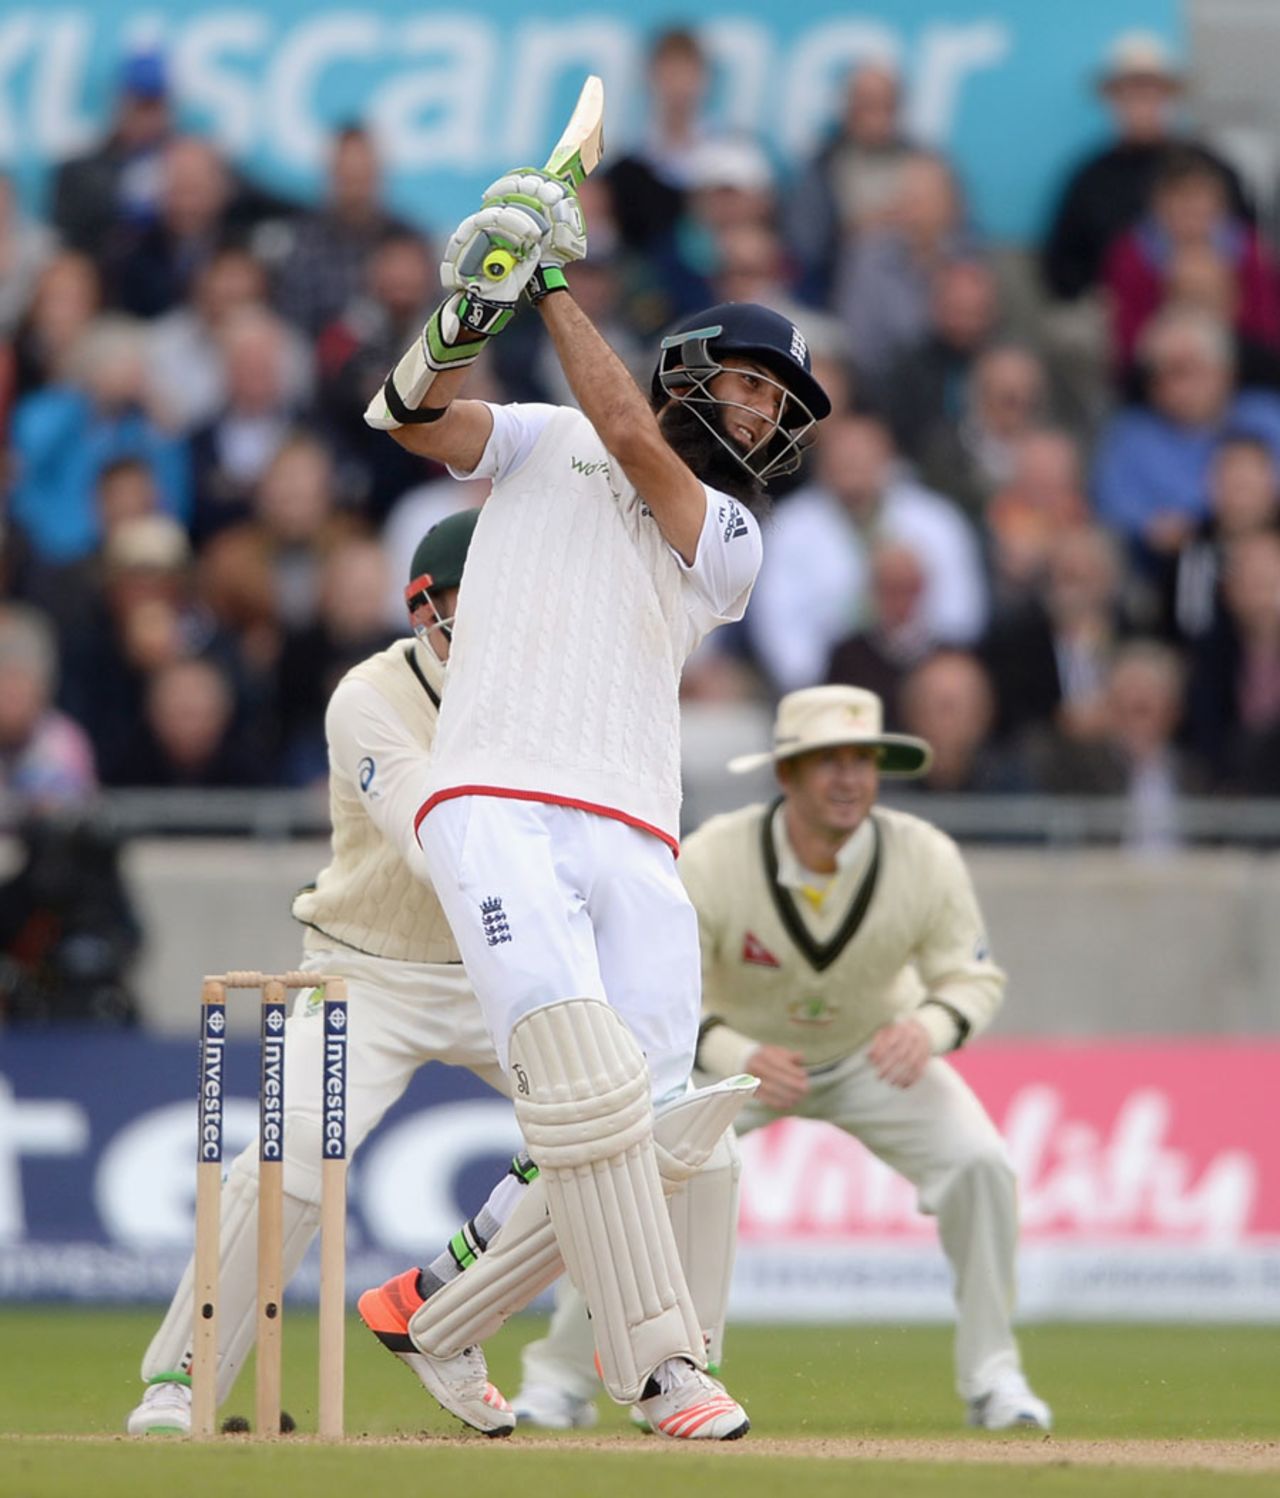 Moeen Ali struck a vital 59 to give England a lead of 145, England v Australia, 3rd Test, Edgbaston, 2nd day, July 30, 2015